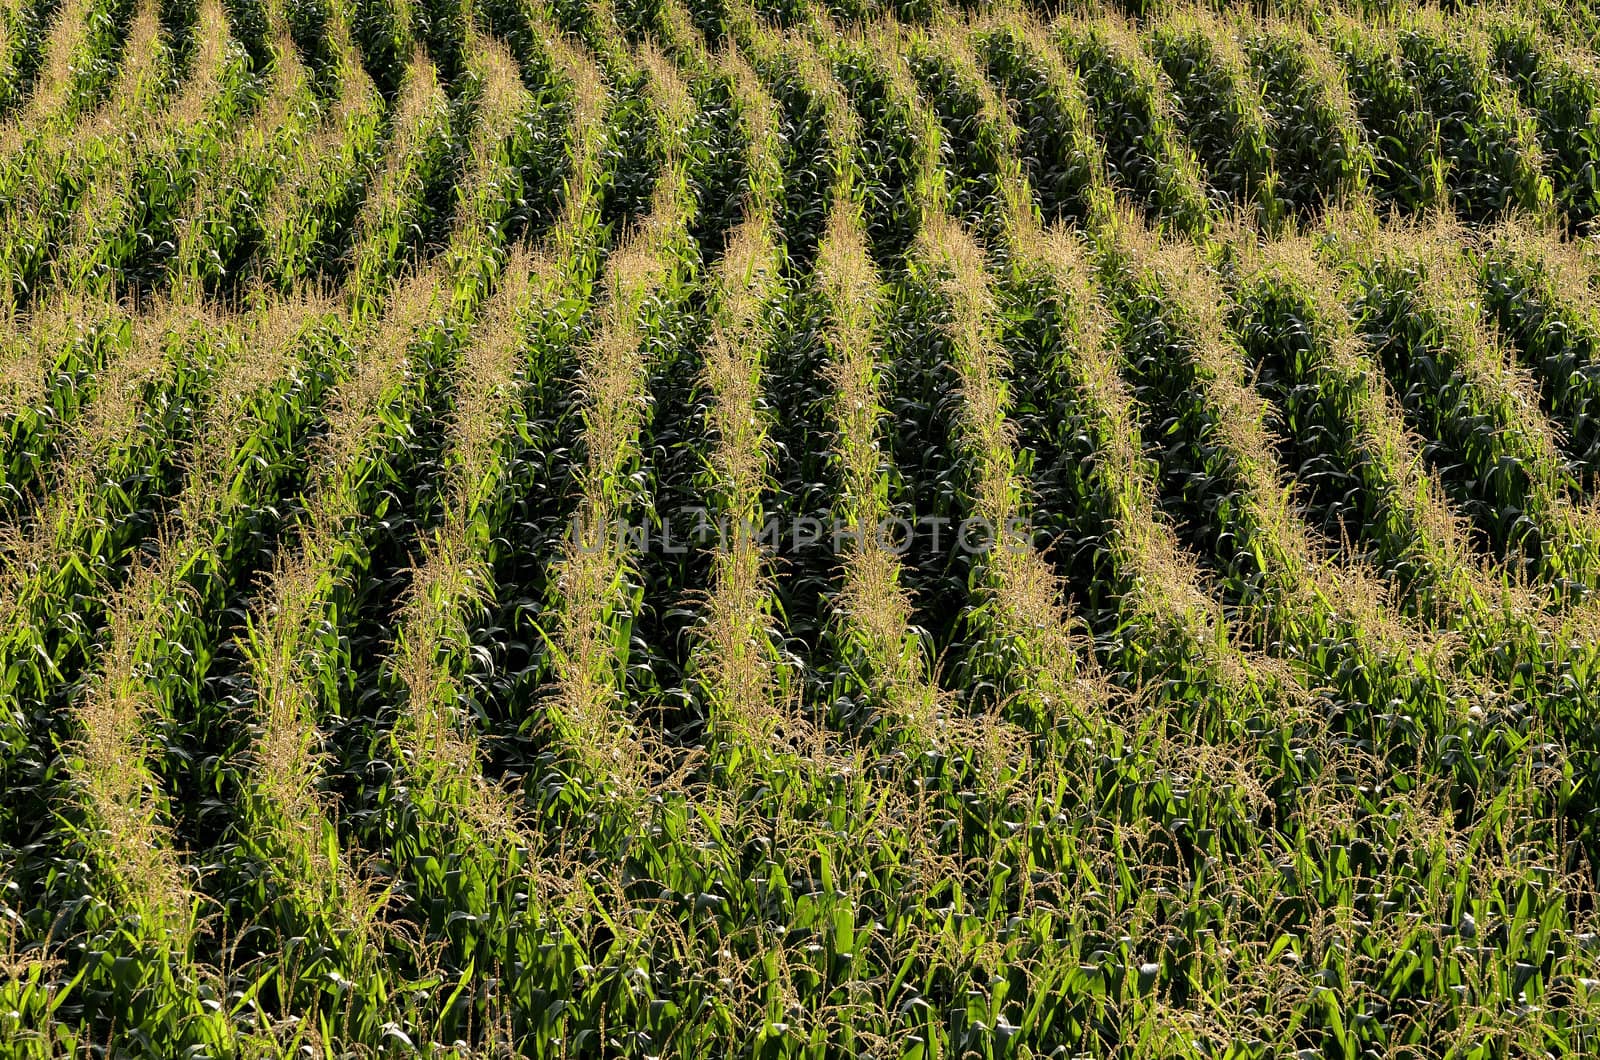 This photo present parallel rows of corn ripening in the field.